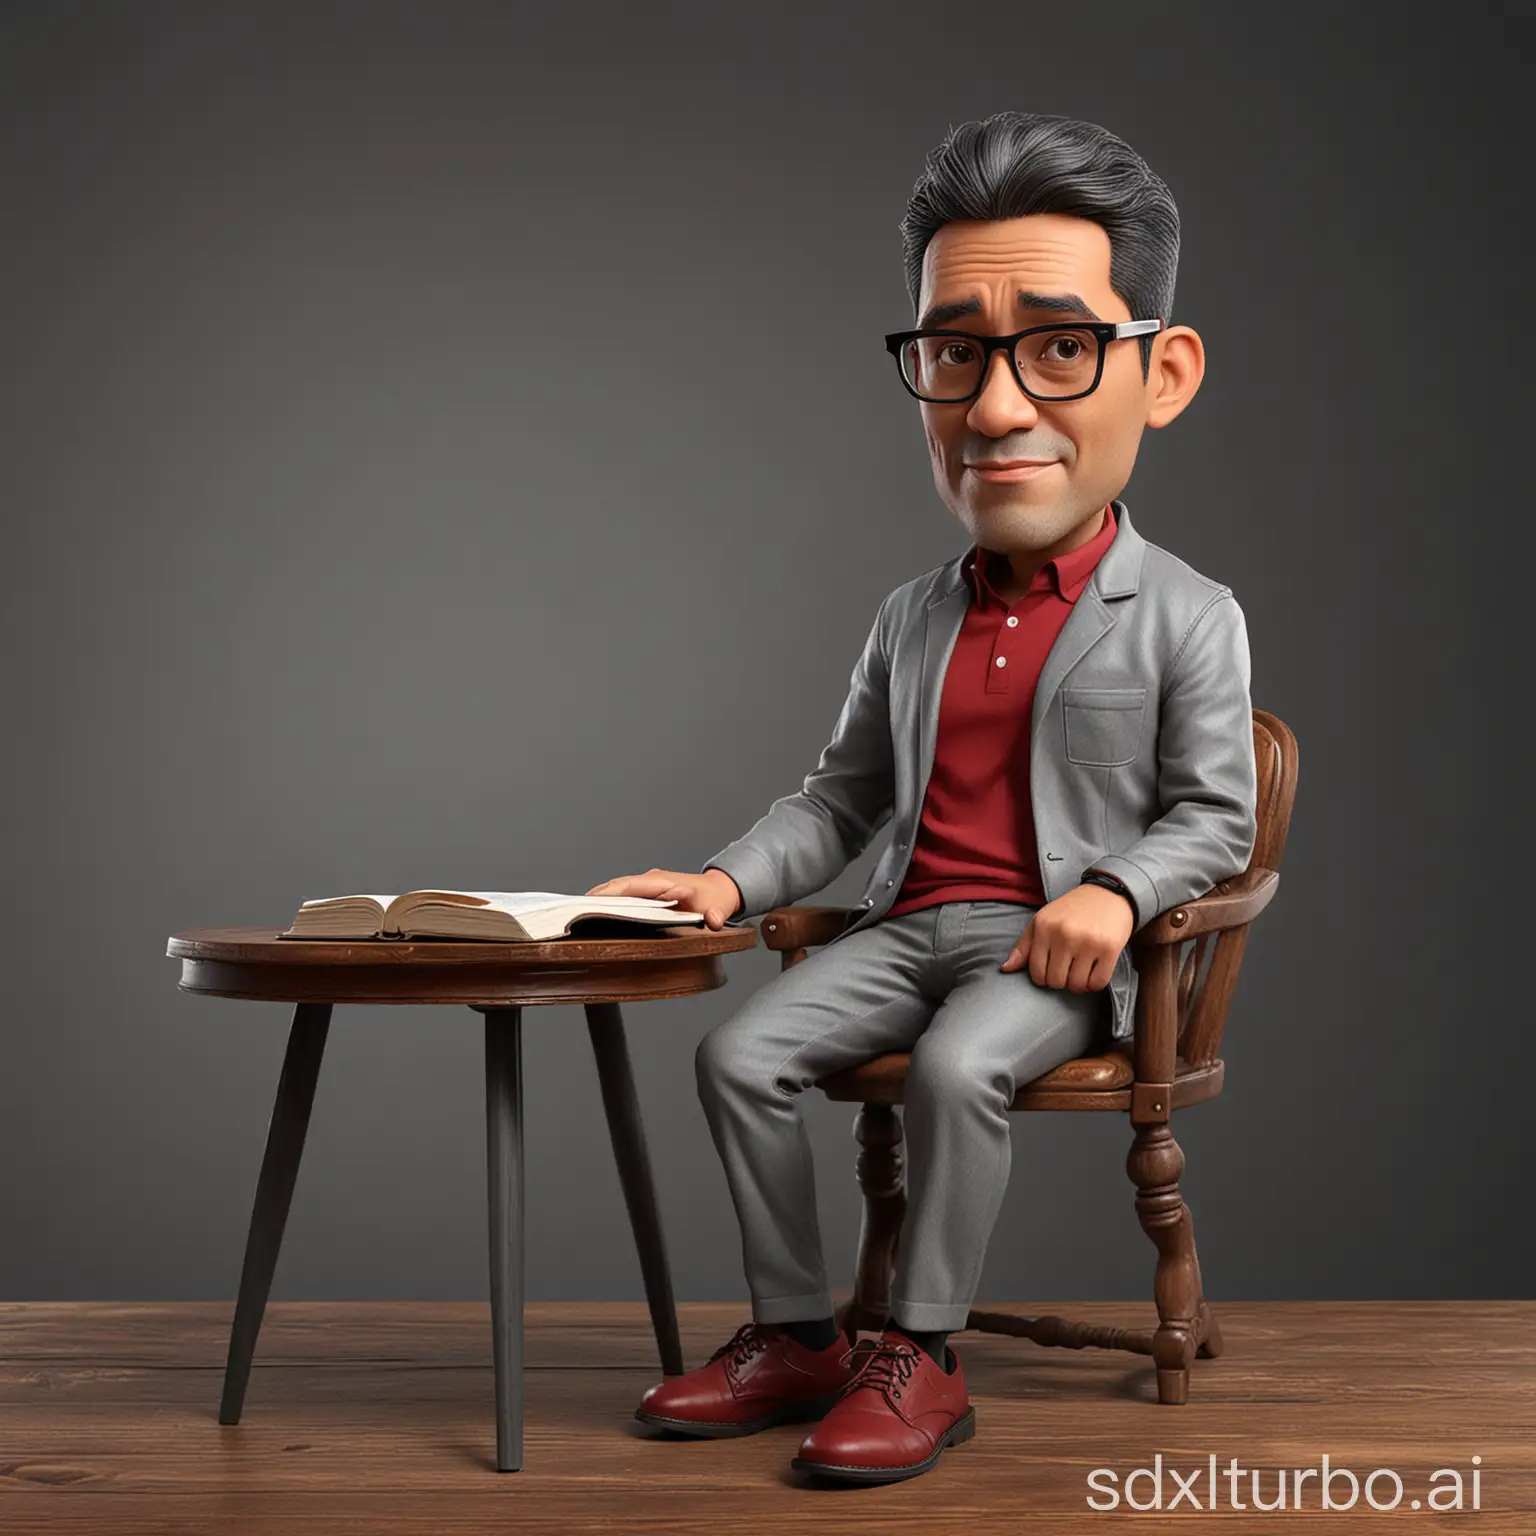 Create caricatures 3D realistic cartoon style full body with big head. A 50 year old Indonesian man. Short hair parted on the side. Sitting relaxed in a chair with dark red wing backs. Wearing rectangular glasses. Wearing a gray jacket and trousers that look worn. Wearing dark brown shoes. The index finger of the right hand is pressed to the head. left hand holding a book. Face facing the book, gaze straight at the camera. Beside it there is a classic wooden table. The background color is dark grey. Use soft photographic lighting, dramatic overhead lighting, very high image quality, clear character details, UHD, 16k, 3d Rendering, very realistic.